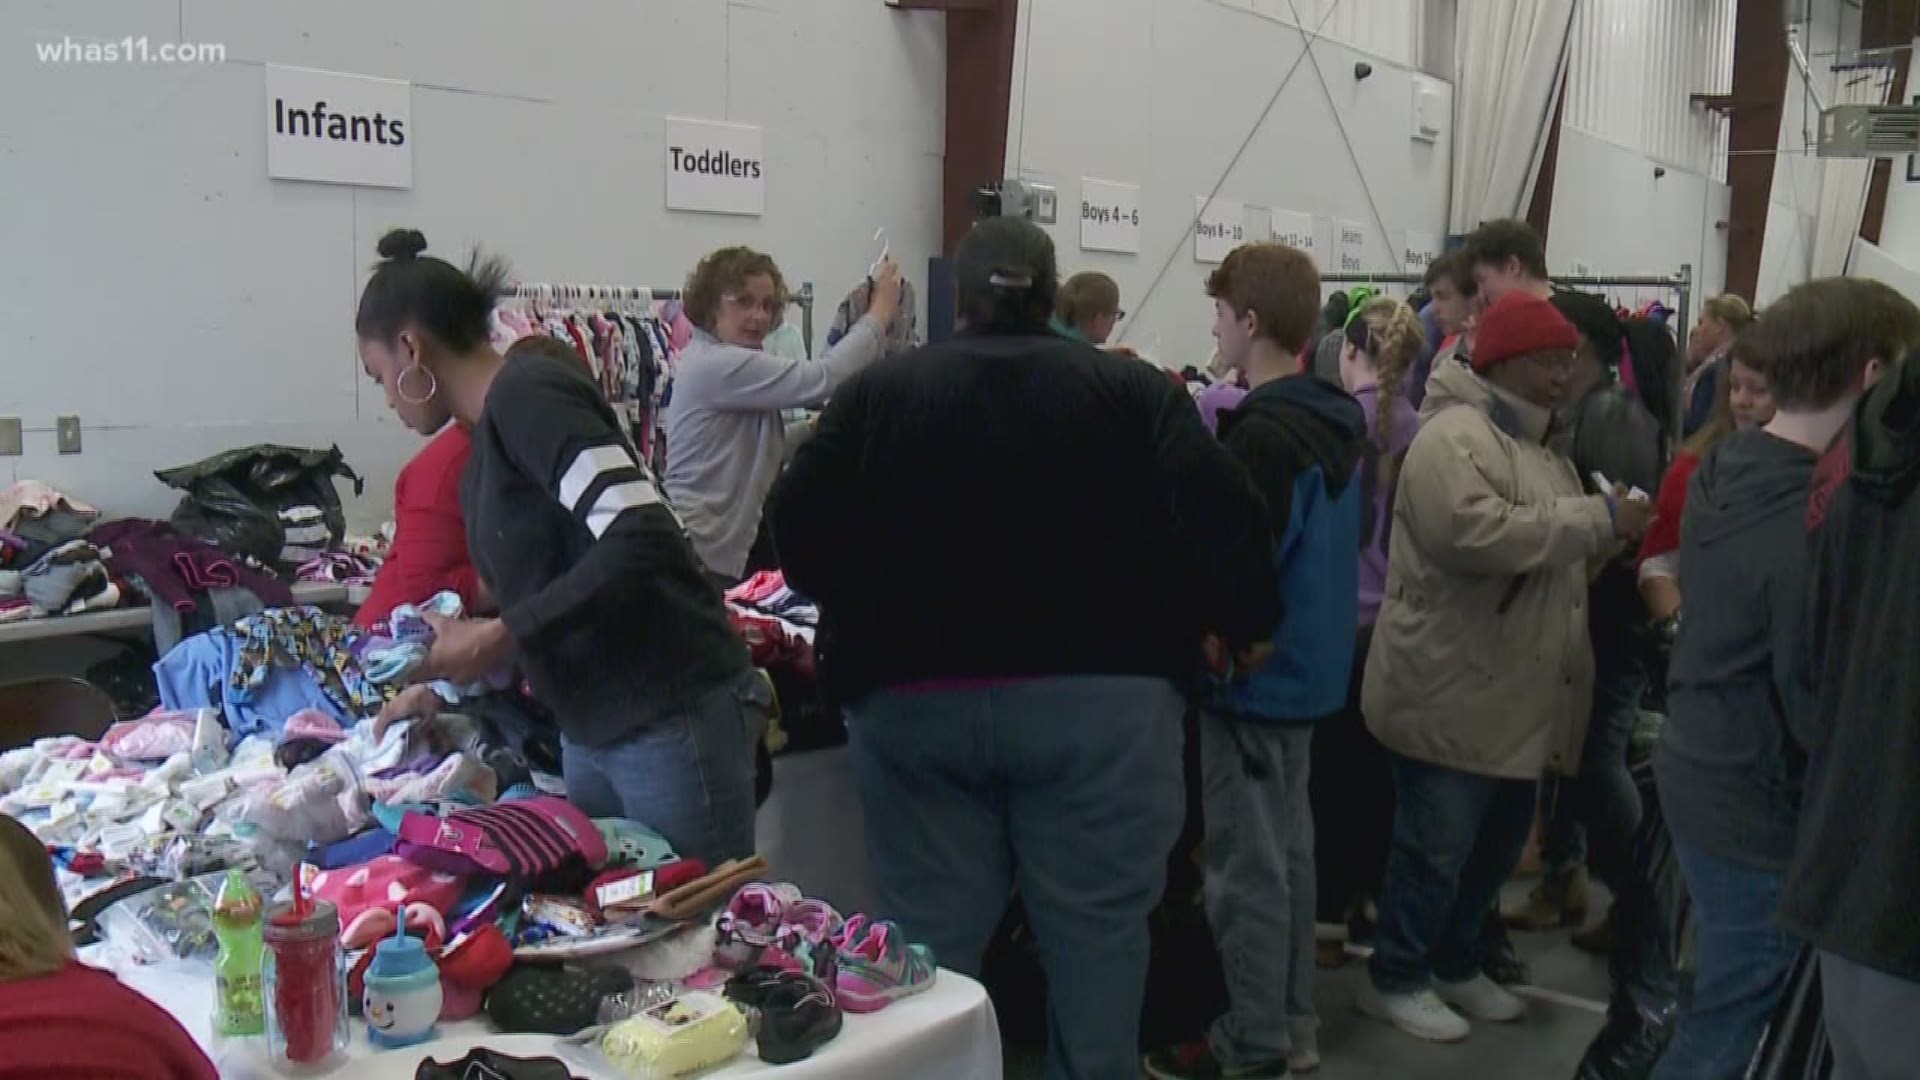 St. Vincent de Paul are once again setting up their Santa Shop -- a makeshift mini mall where parents who need a little extra help can shop for their families.